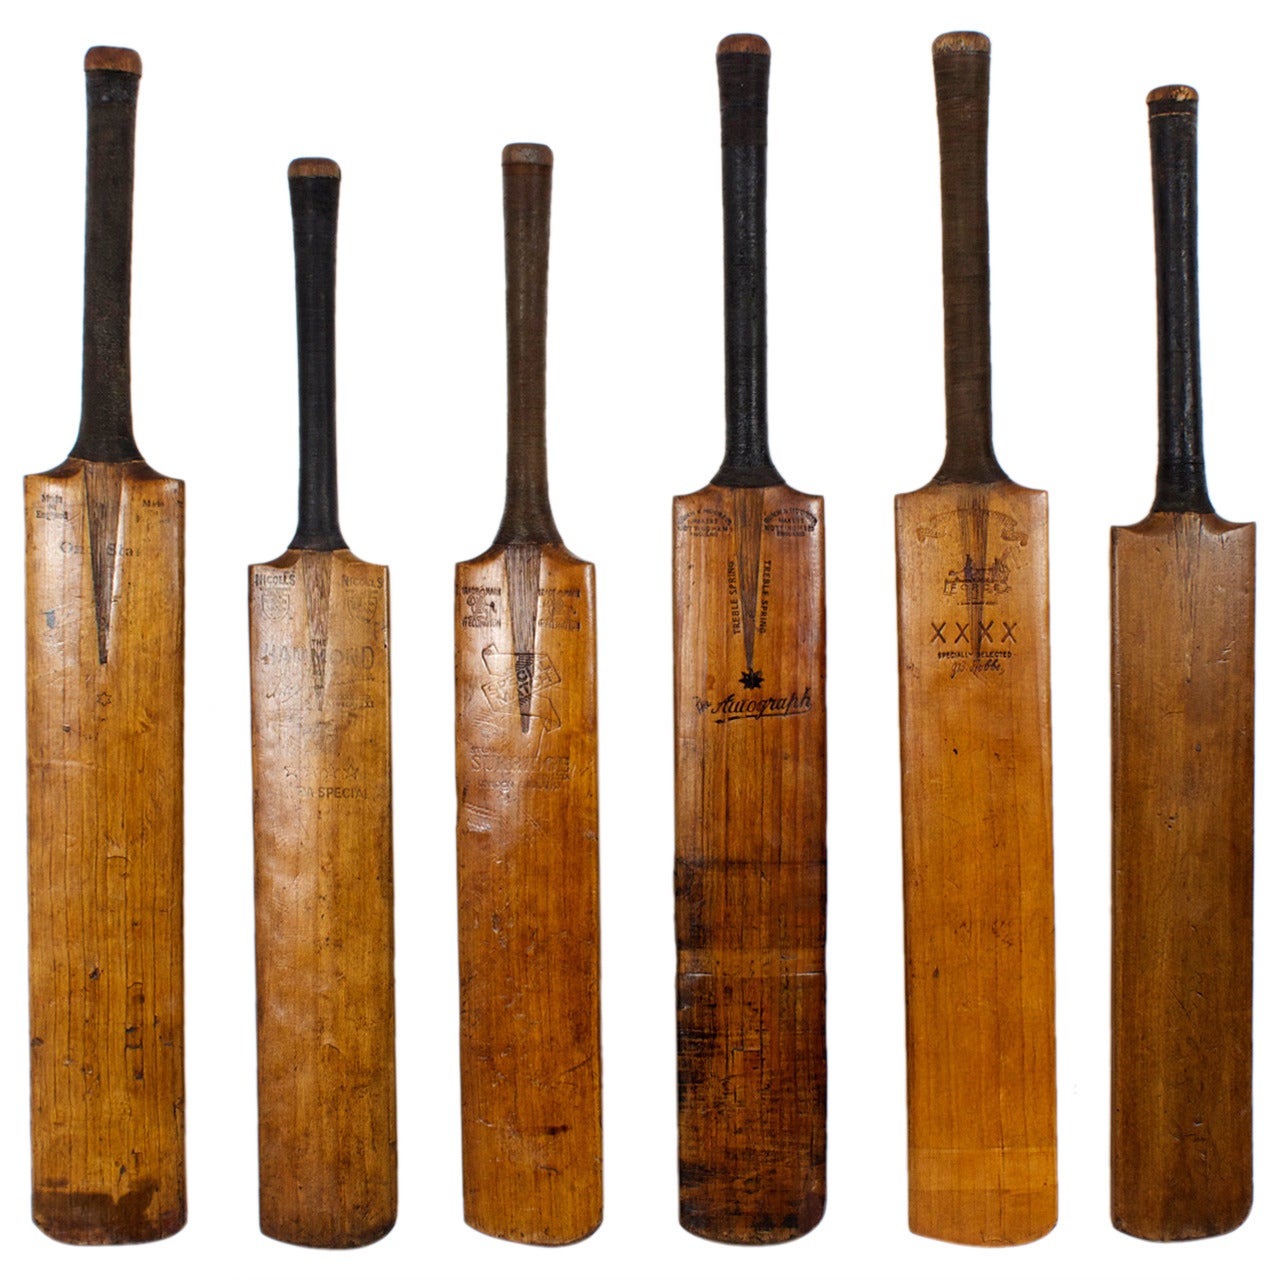 Collection of Fvie Cricket Bats, Great Color and Patina